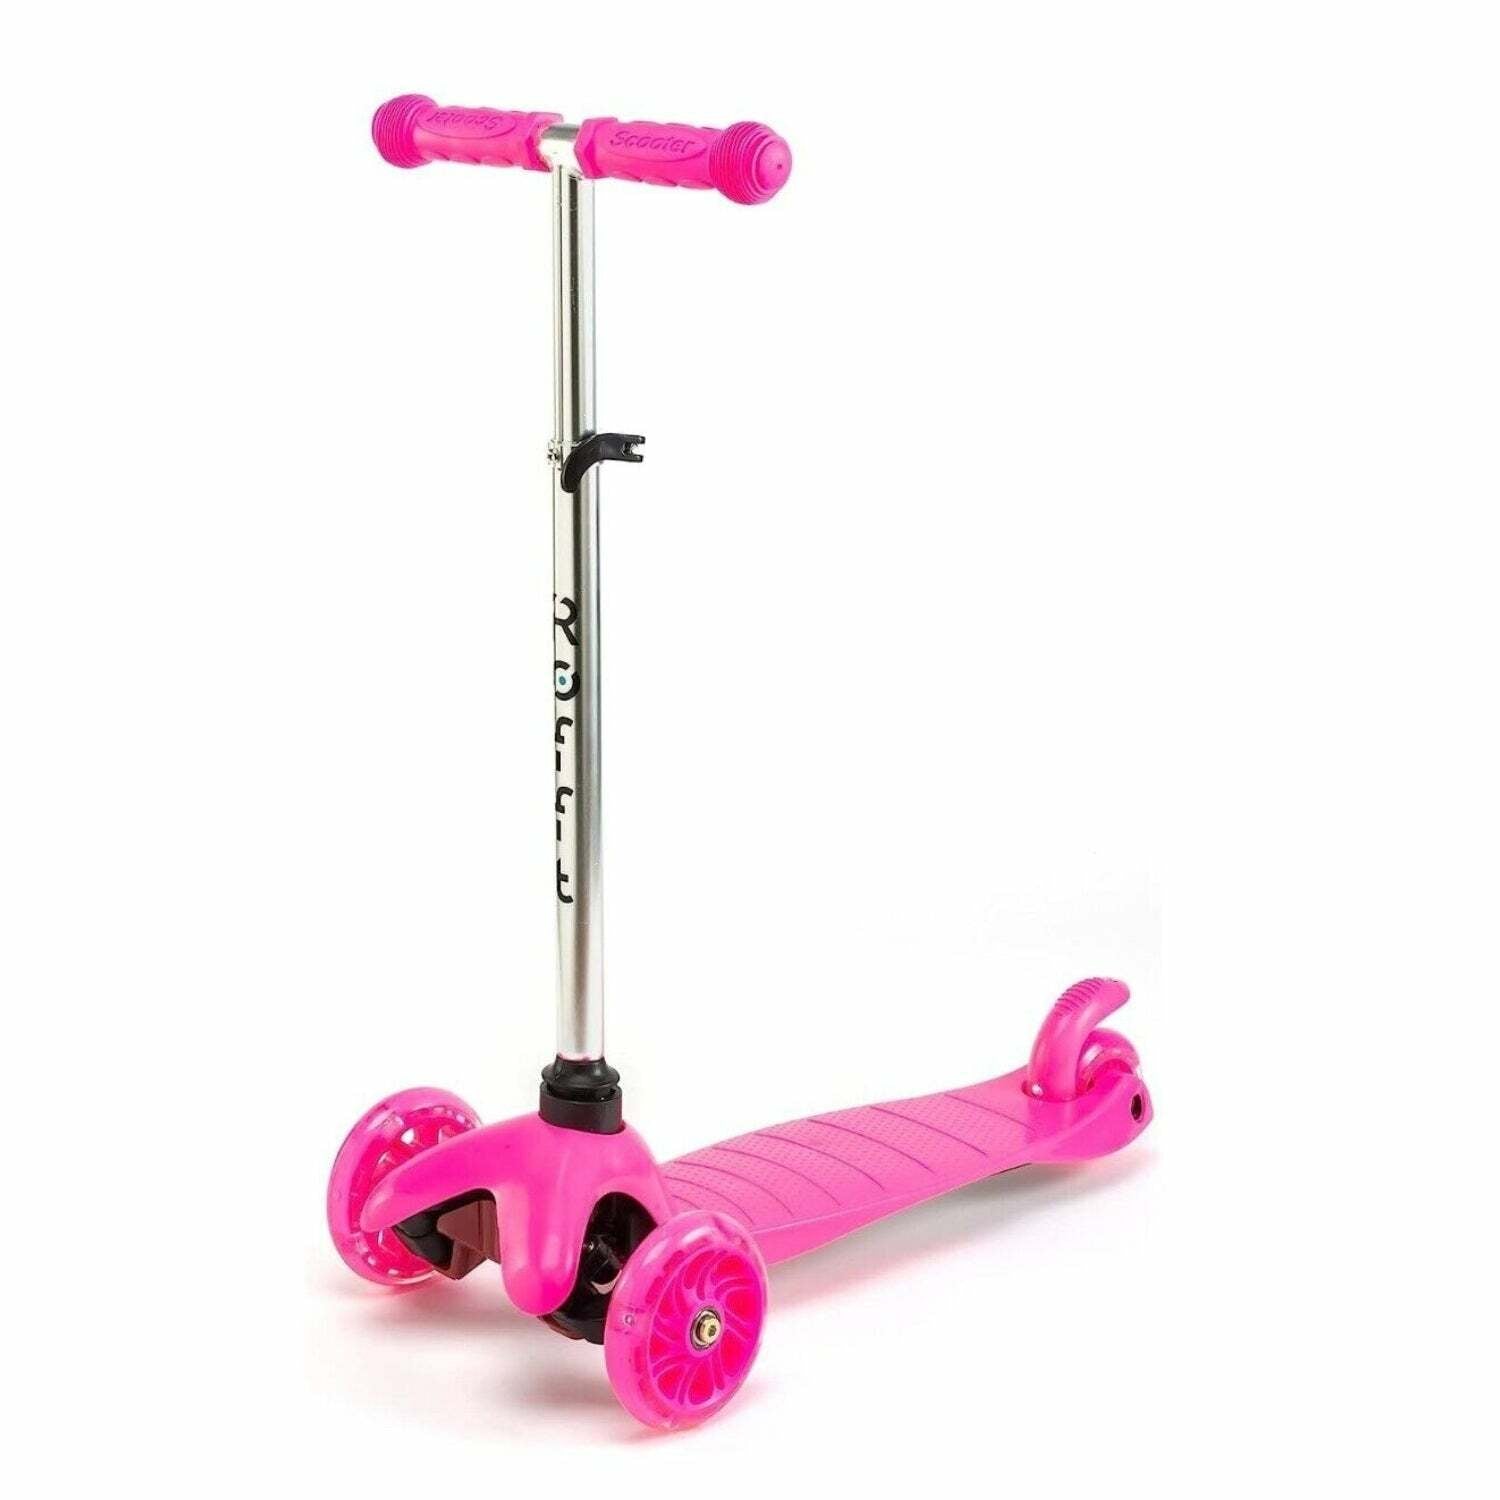 ROFFT - Kick Scooter, Lean-to-Steer LED 3 Wheel, Kids Ages 3-5 Pink